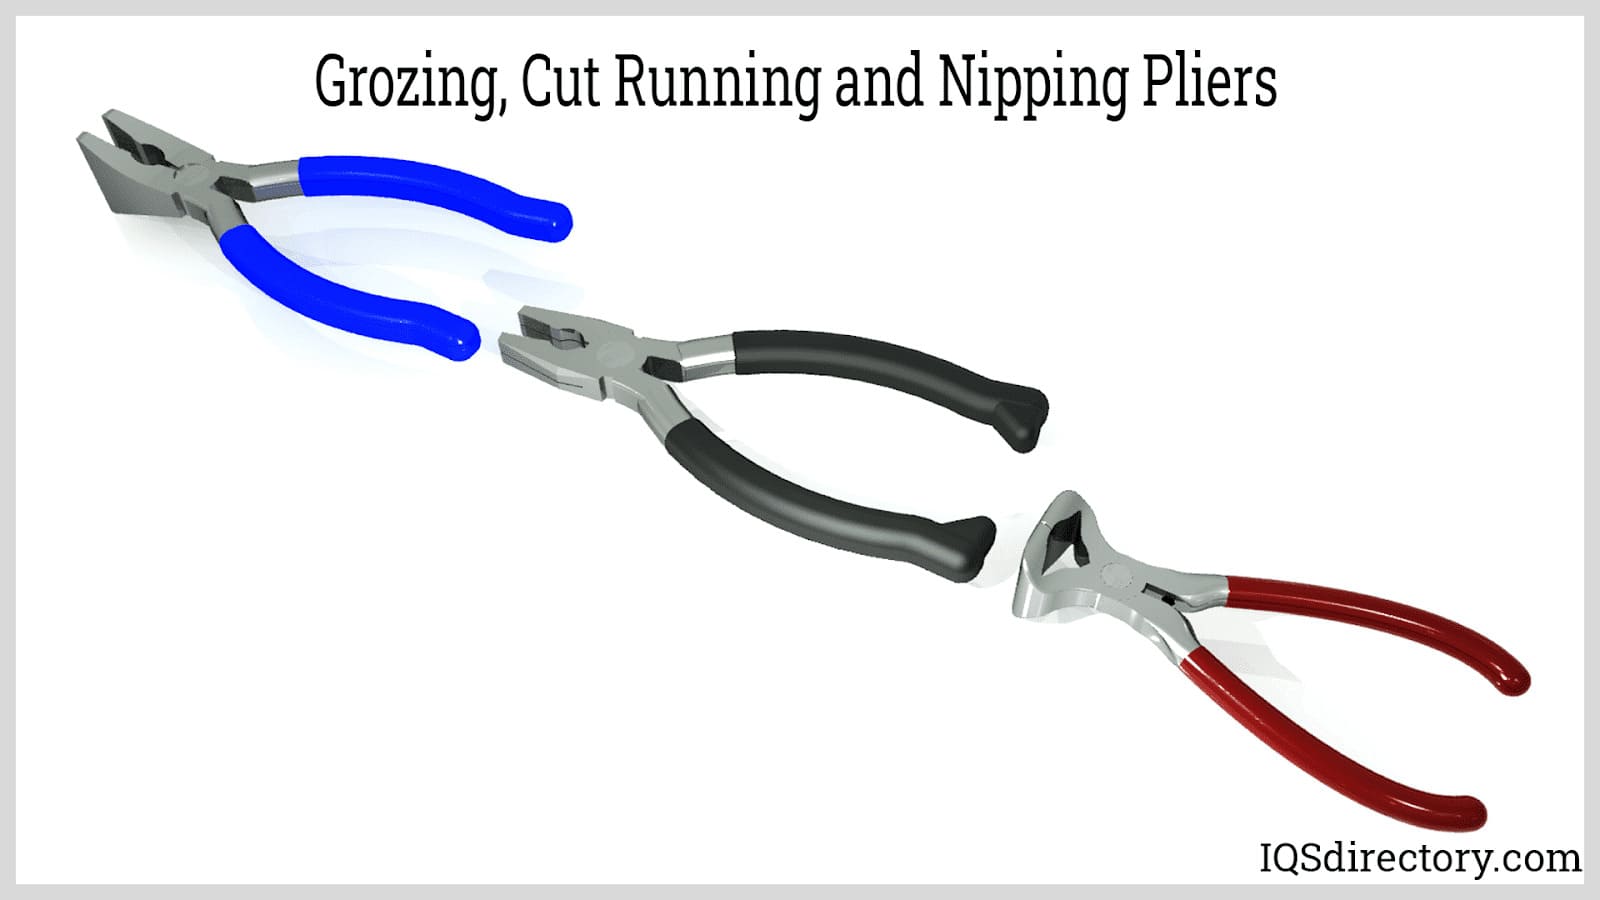 Grozing, Cut Running, and Nipping Pliers